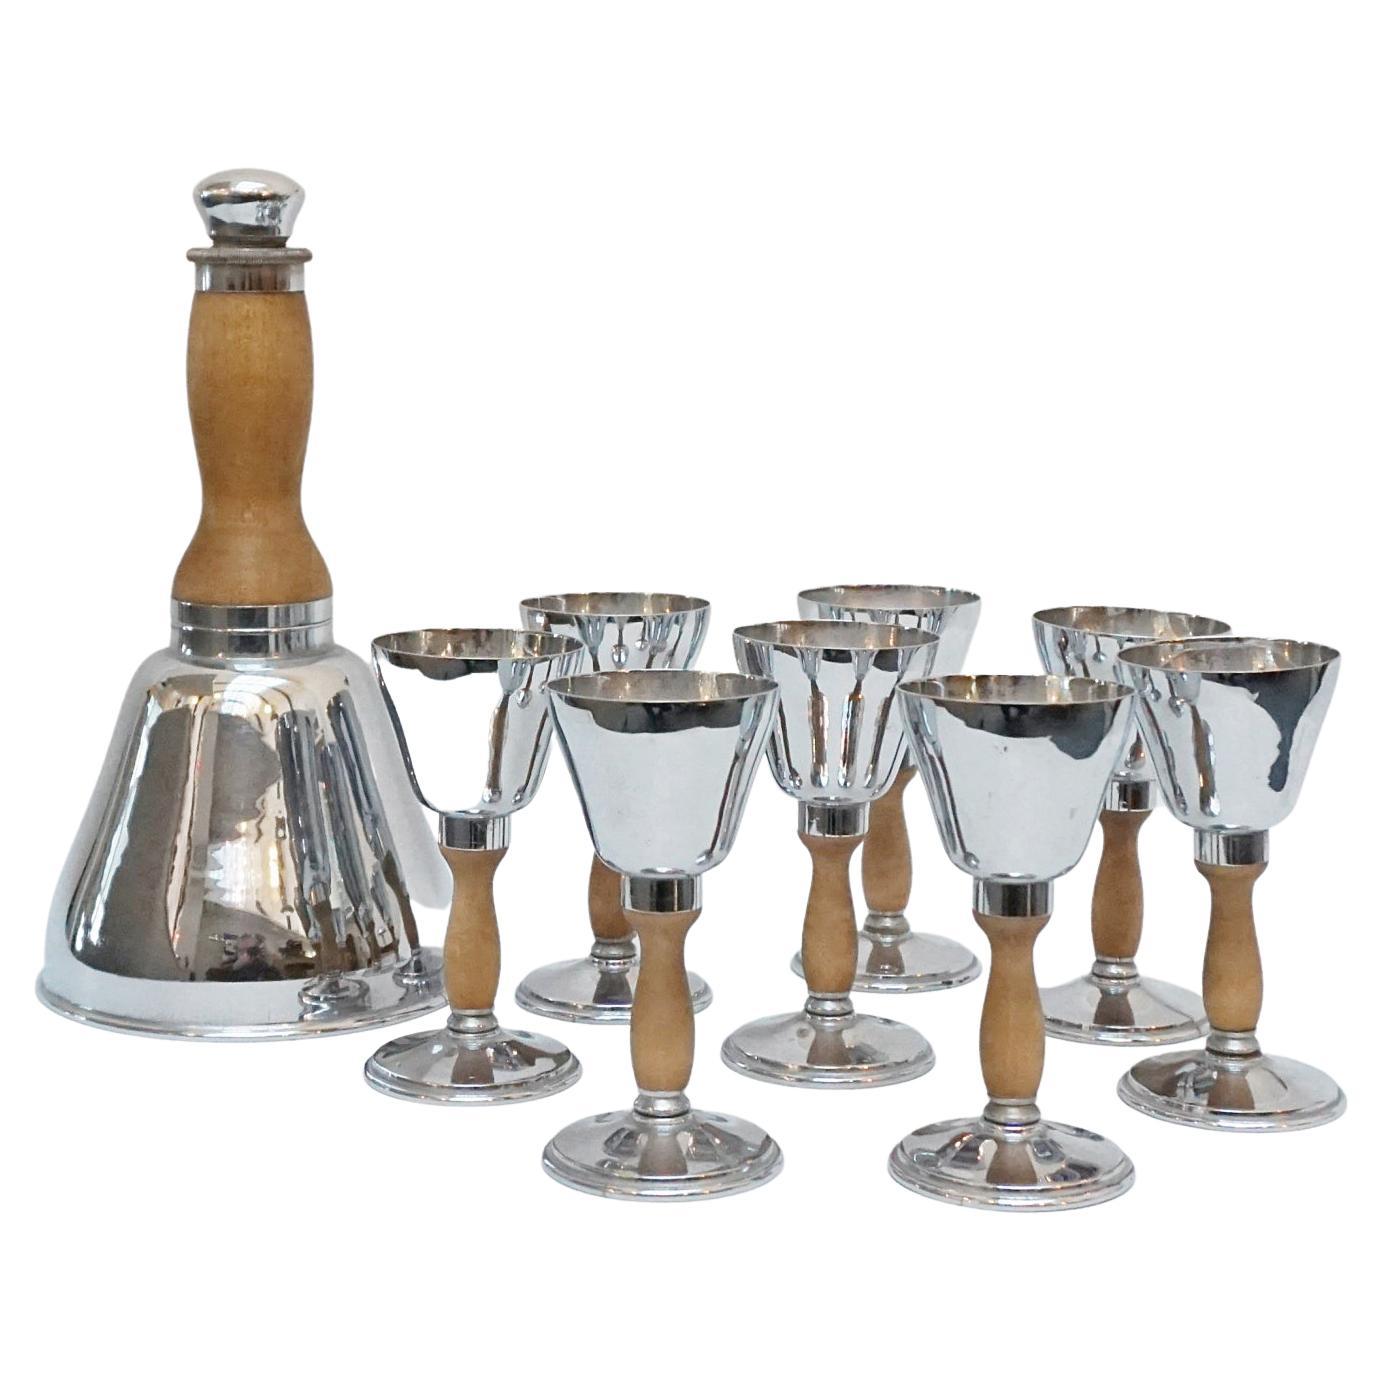 Art Deco cocktail shaker and eight cups. Shaker in the form of a bell. Metal and fruitwood. 

Dimensions: Shaker H 26.5cm D 14cm Cups H 13cm \

Origin: English 

Date: Circa 1930

Item Number: 222221.